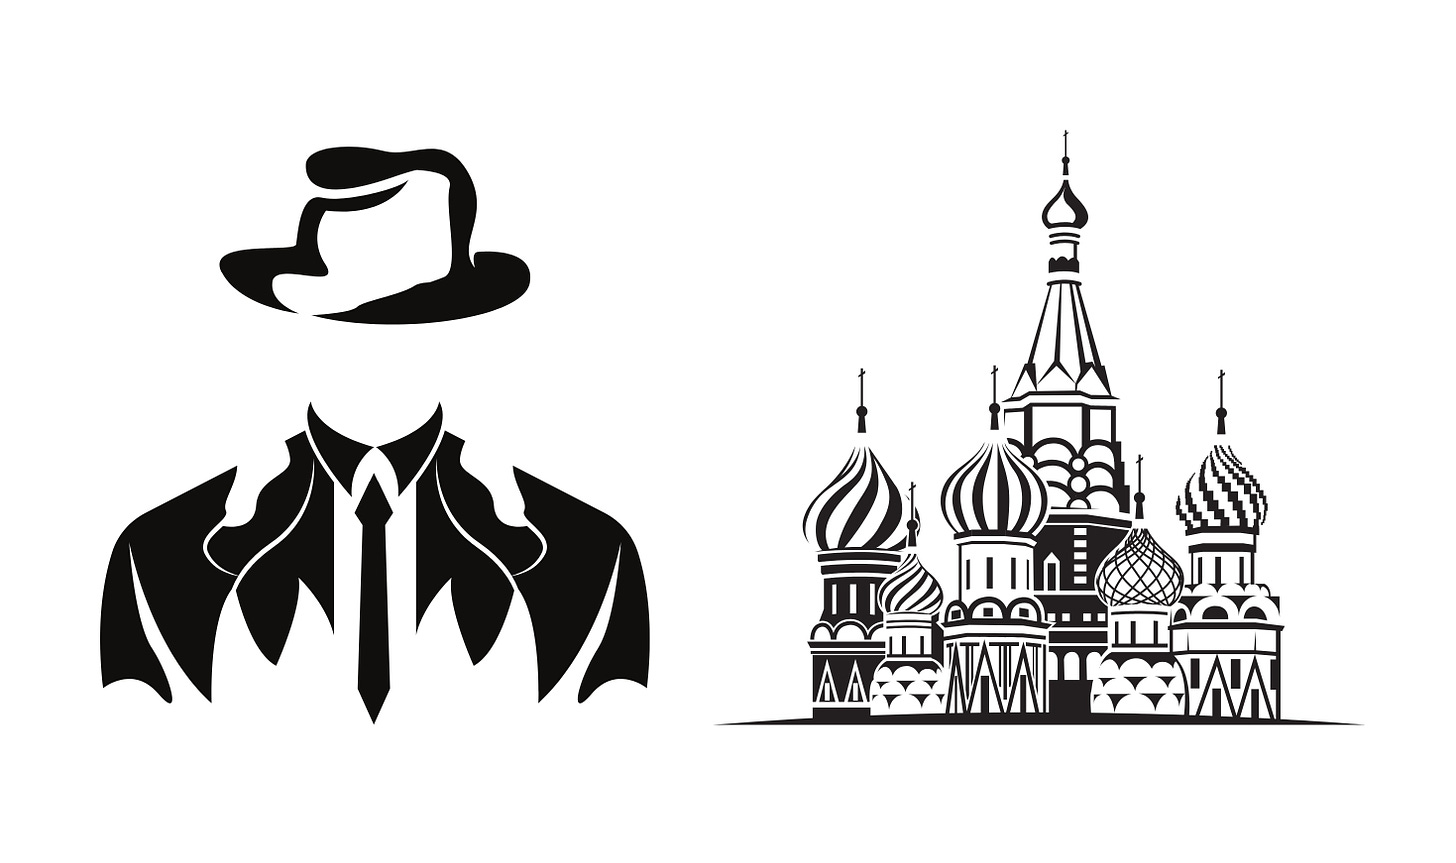 Graphic outline of gentleman and of Moscow skyline.